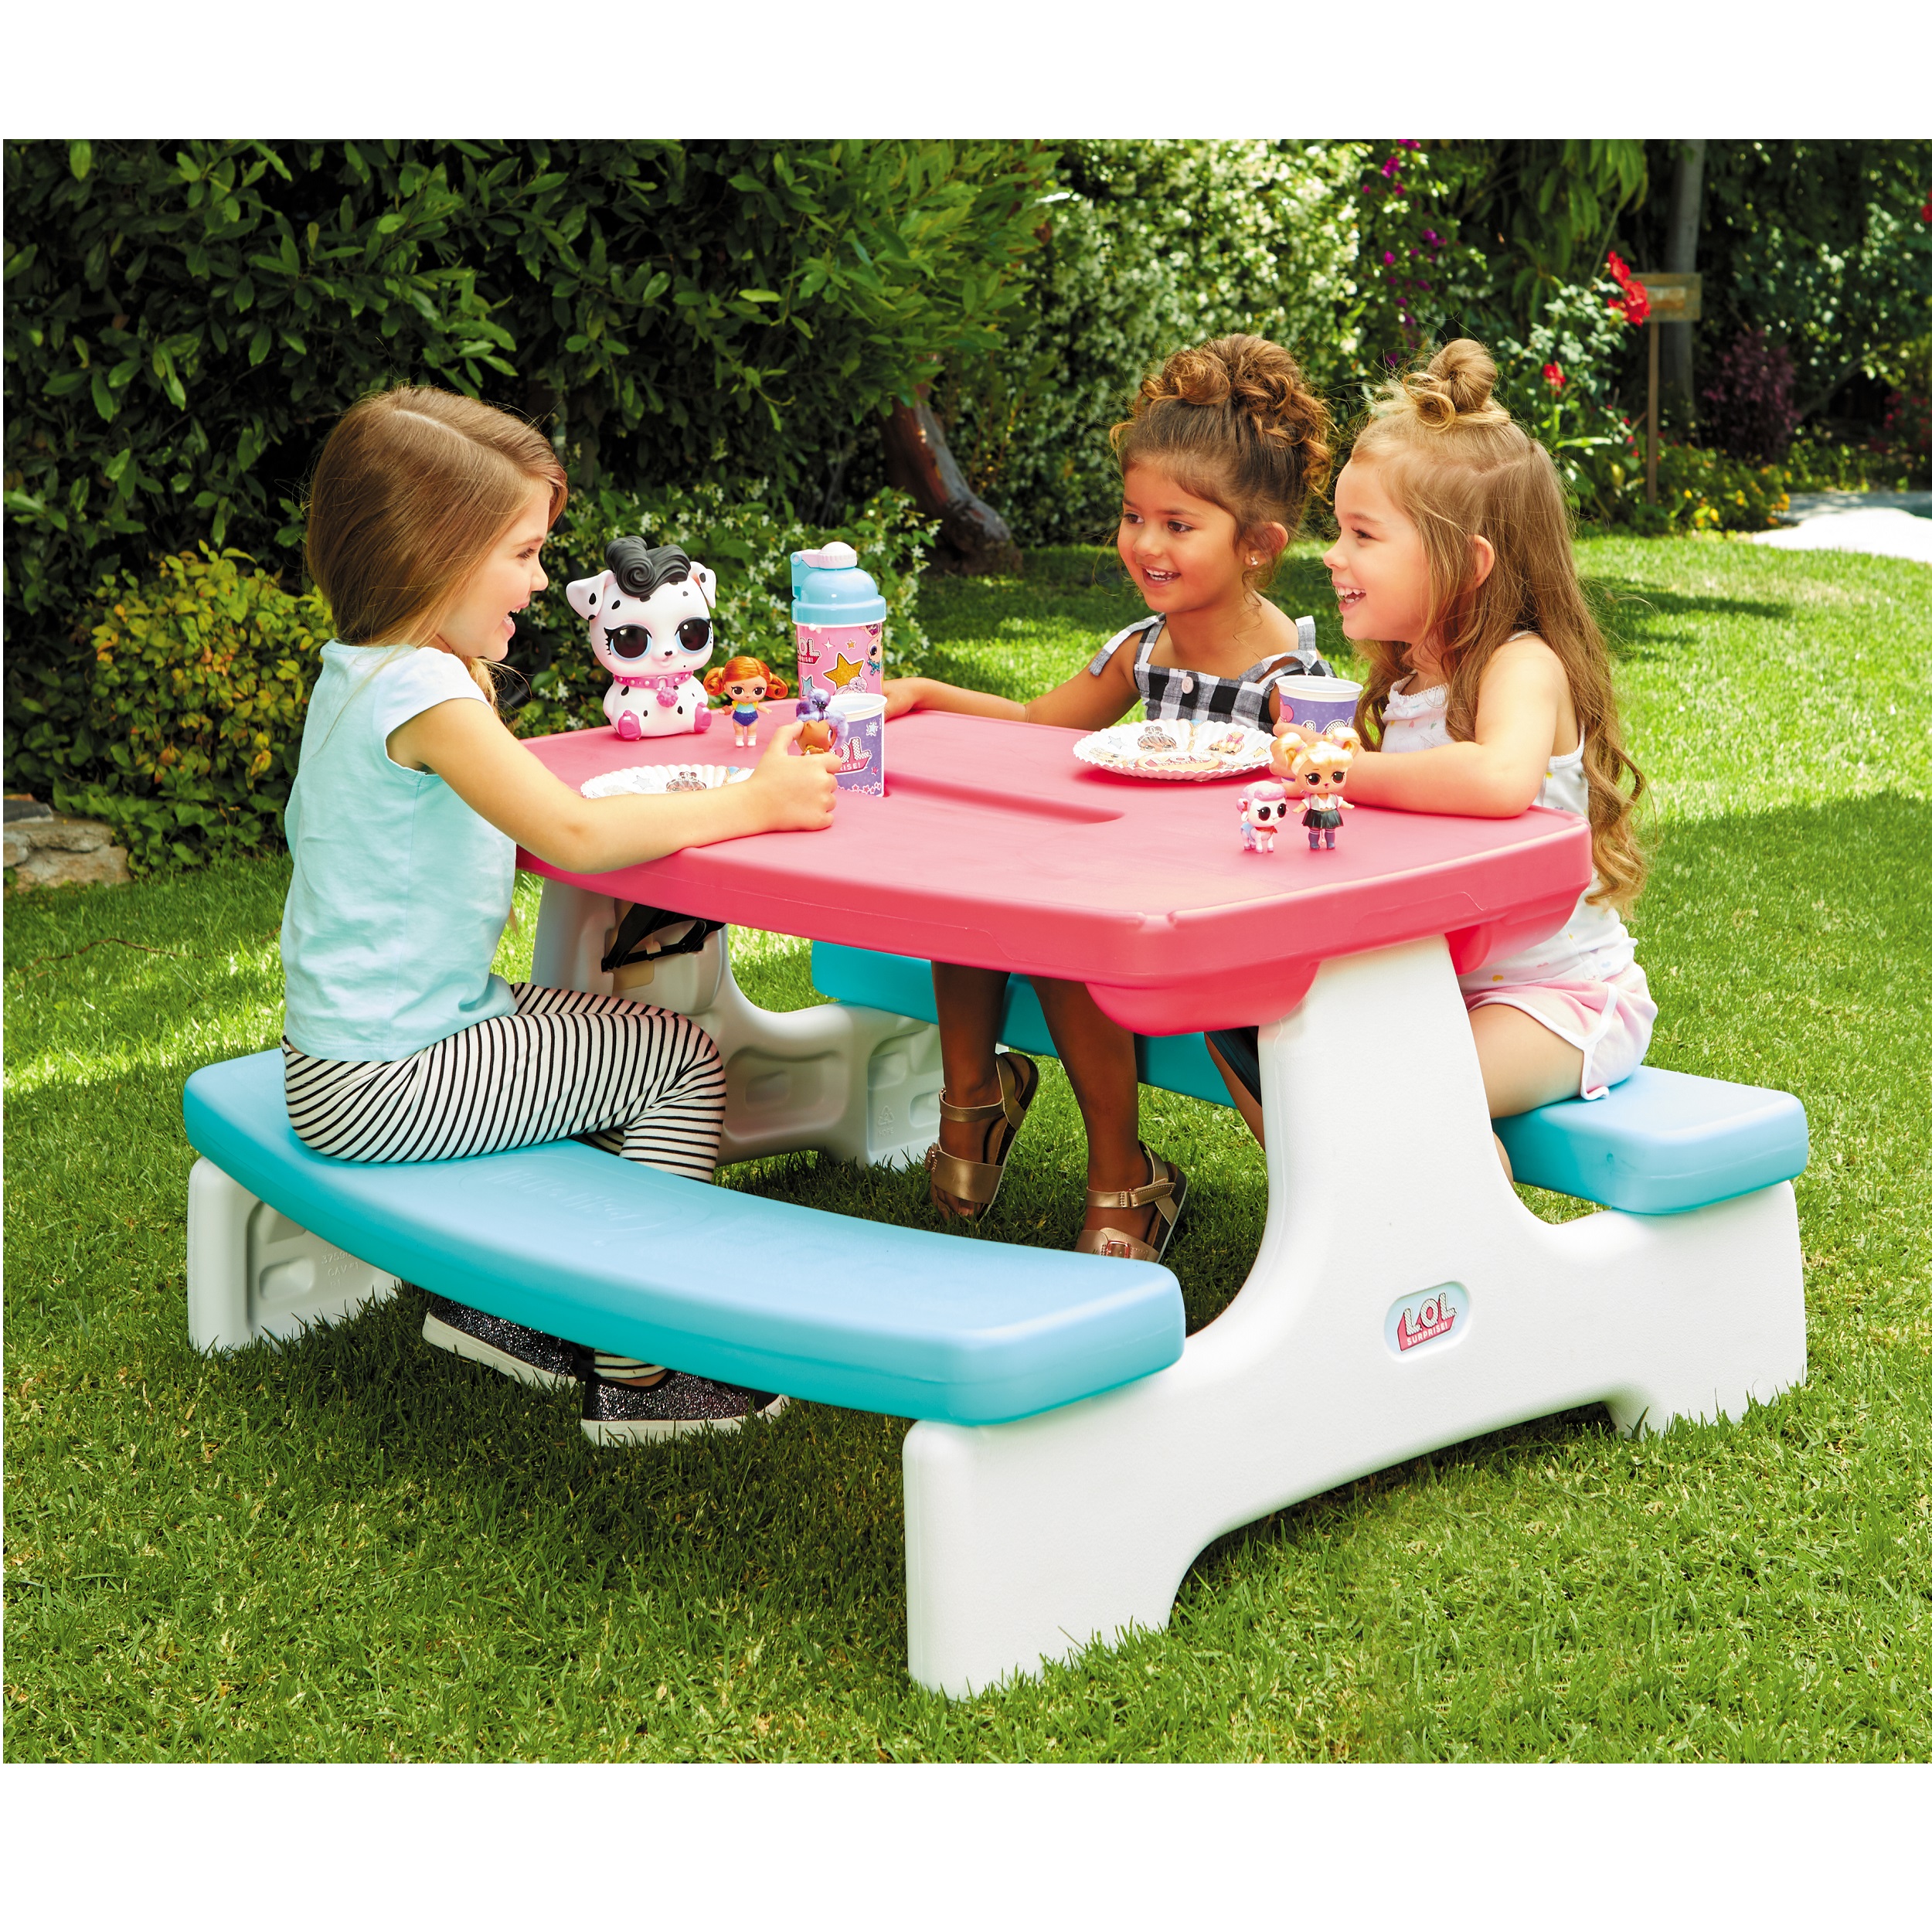 L.O.L Surprise! Birthday Party Kids Picnic Table with Umbrella, Great Gift for Kids Ages 4, 5, 6+ - image 4 of 7